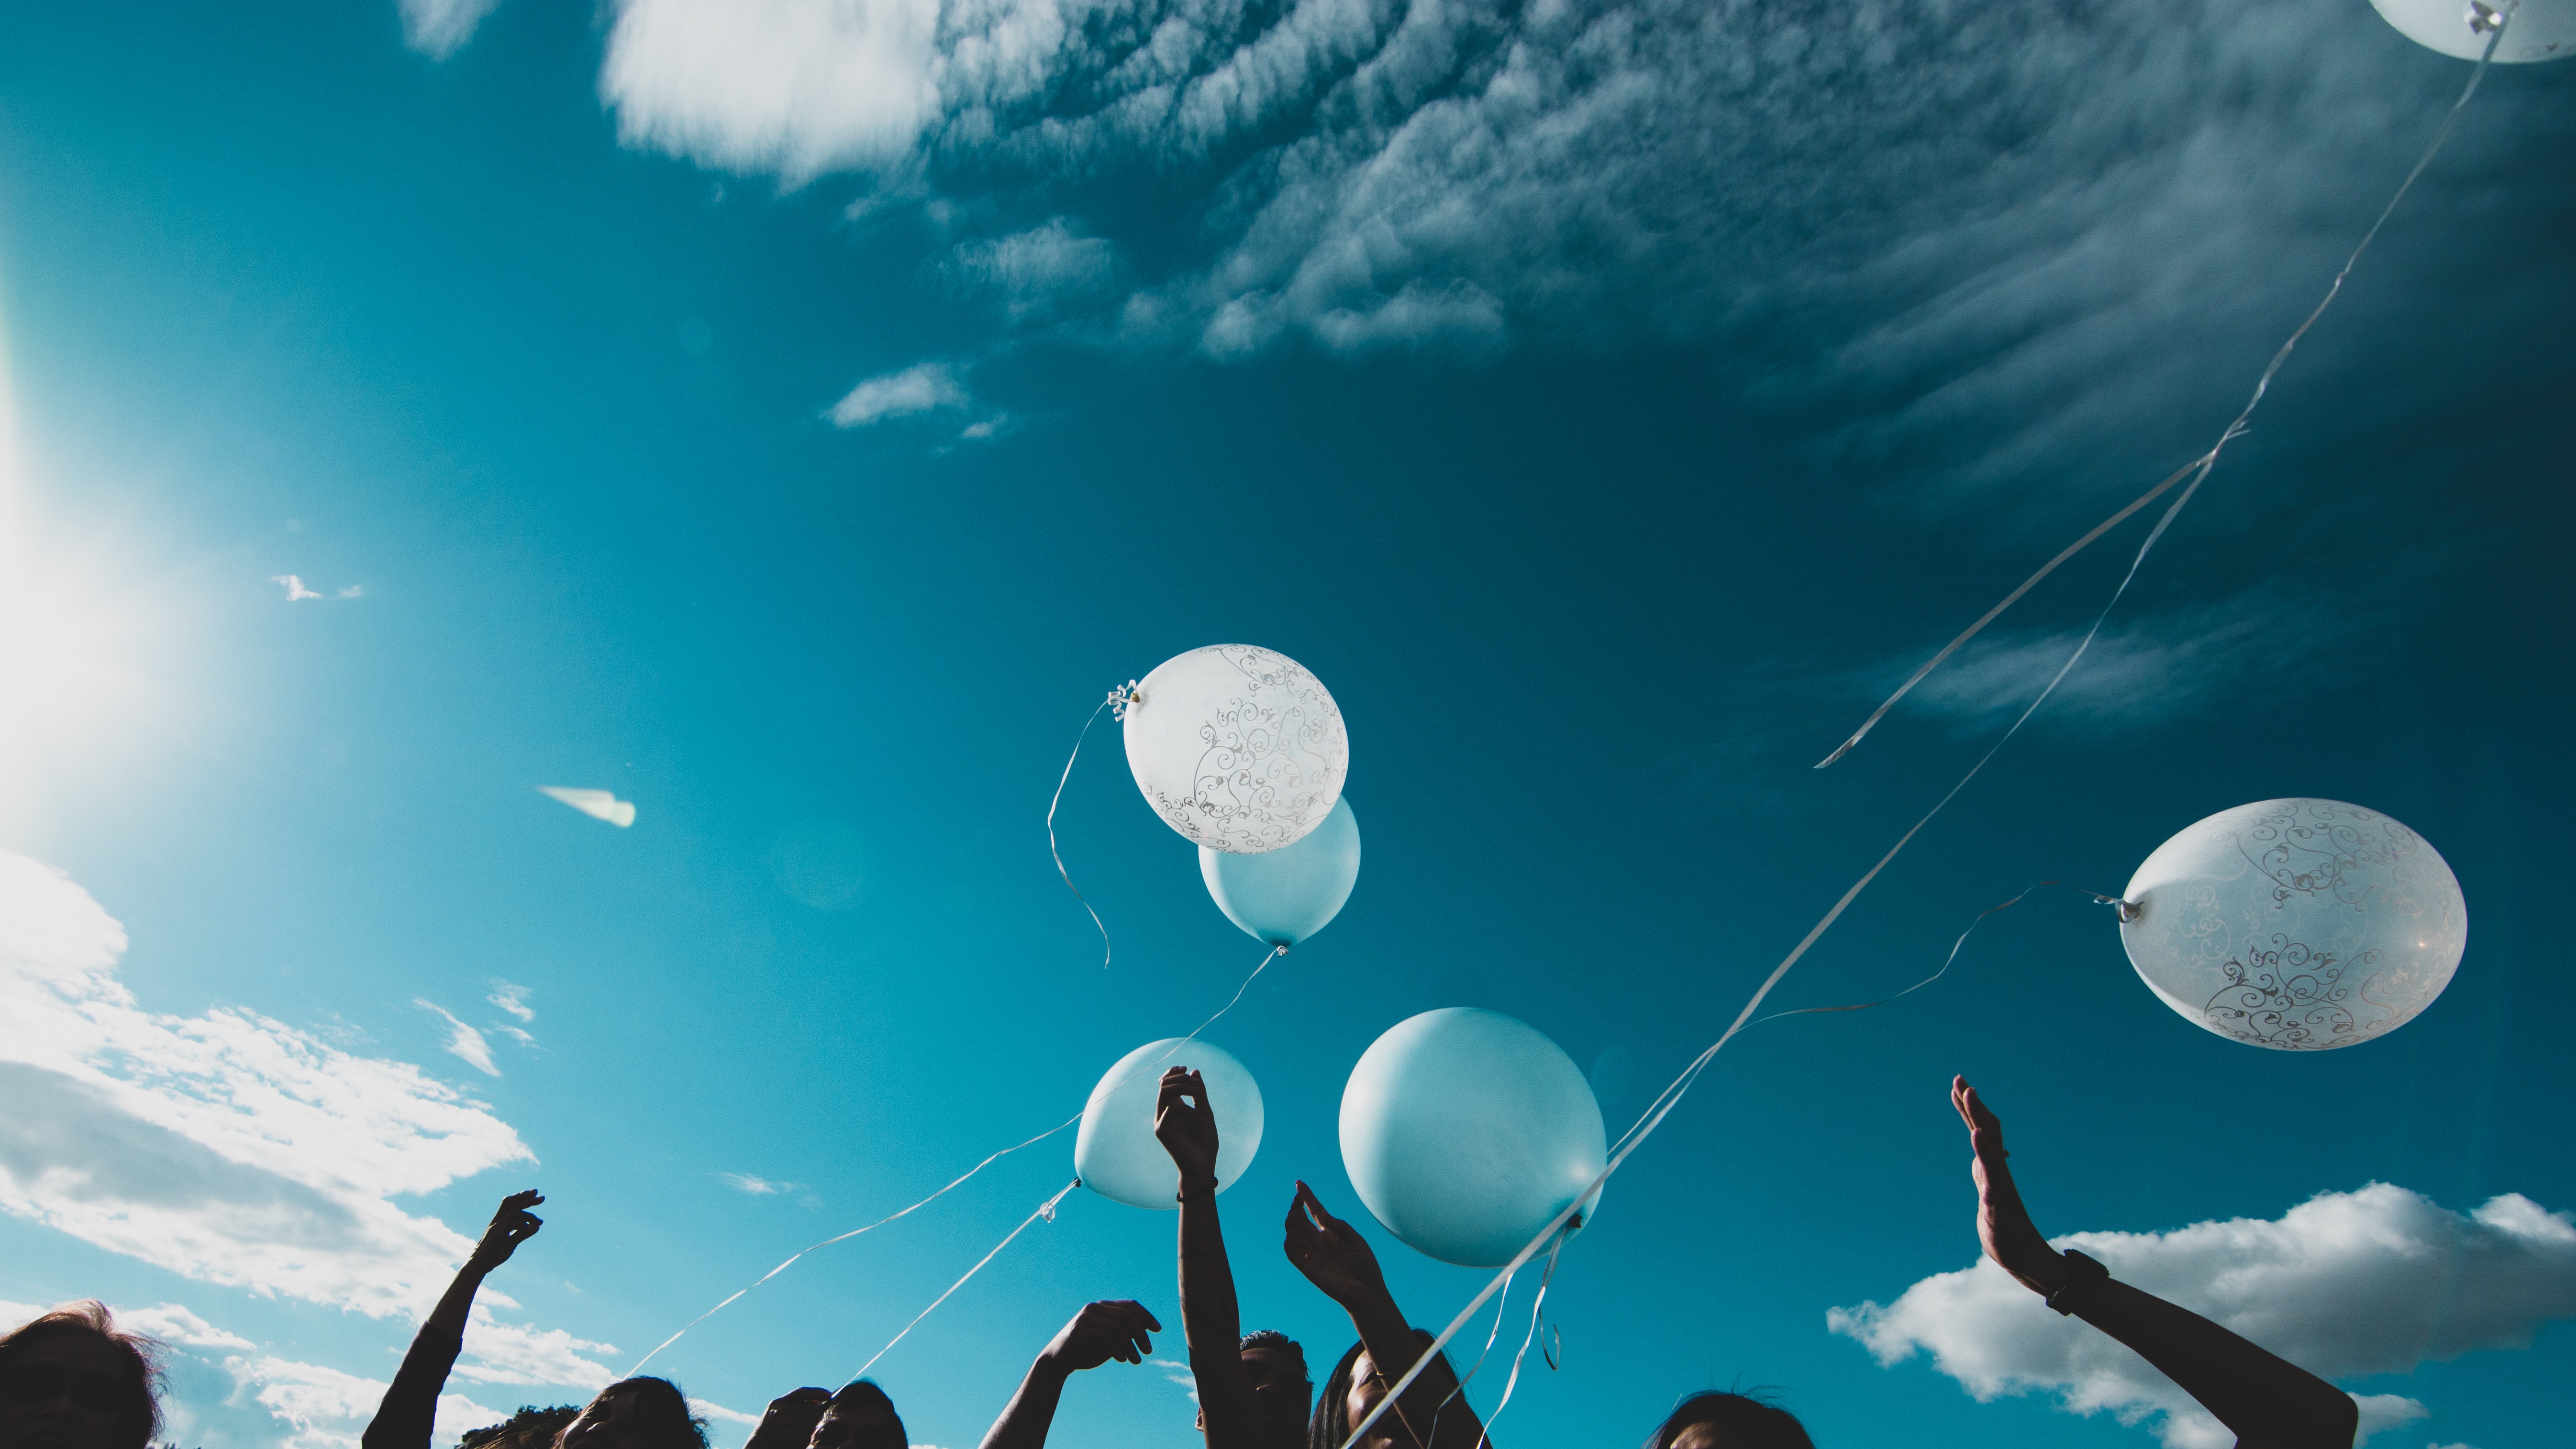 balloons, air balloons, people, sky, miscellanea, miscellaneous, hands, fly, to fly iphone wallpaper